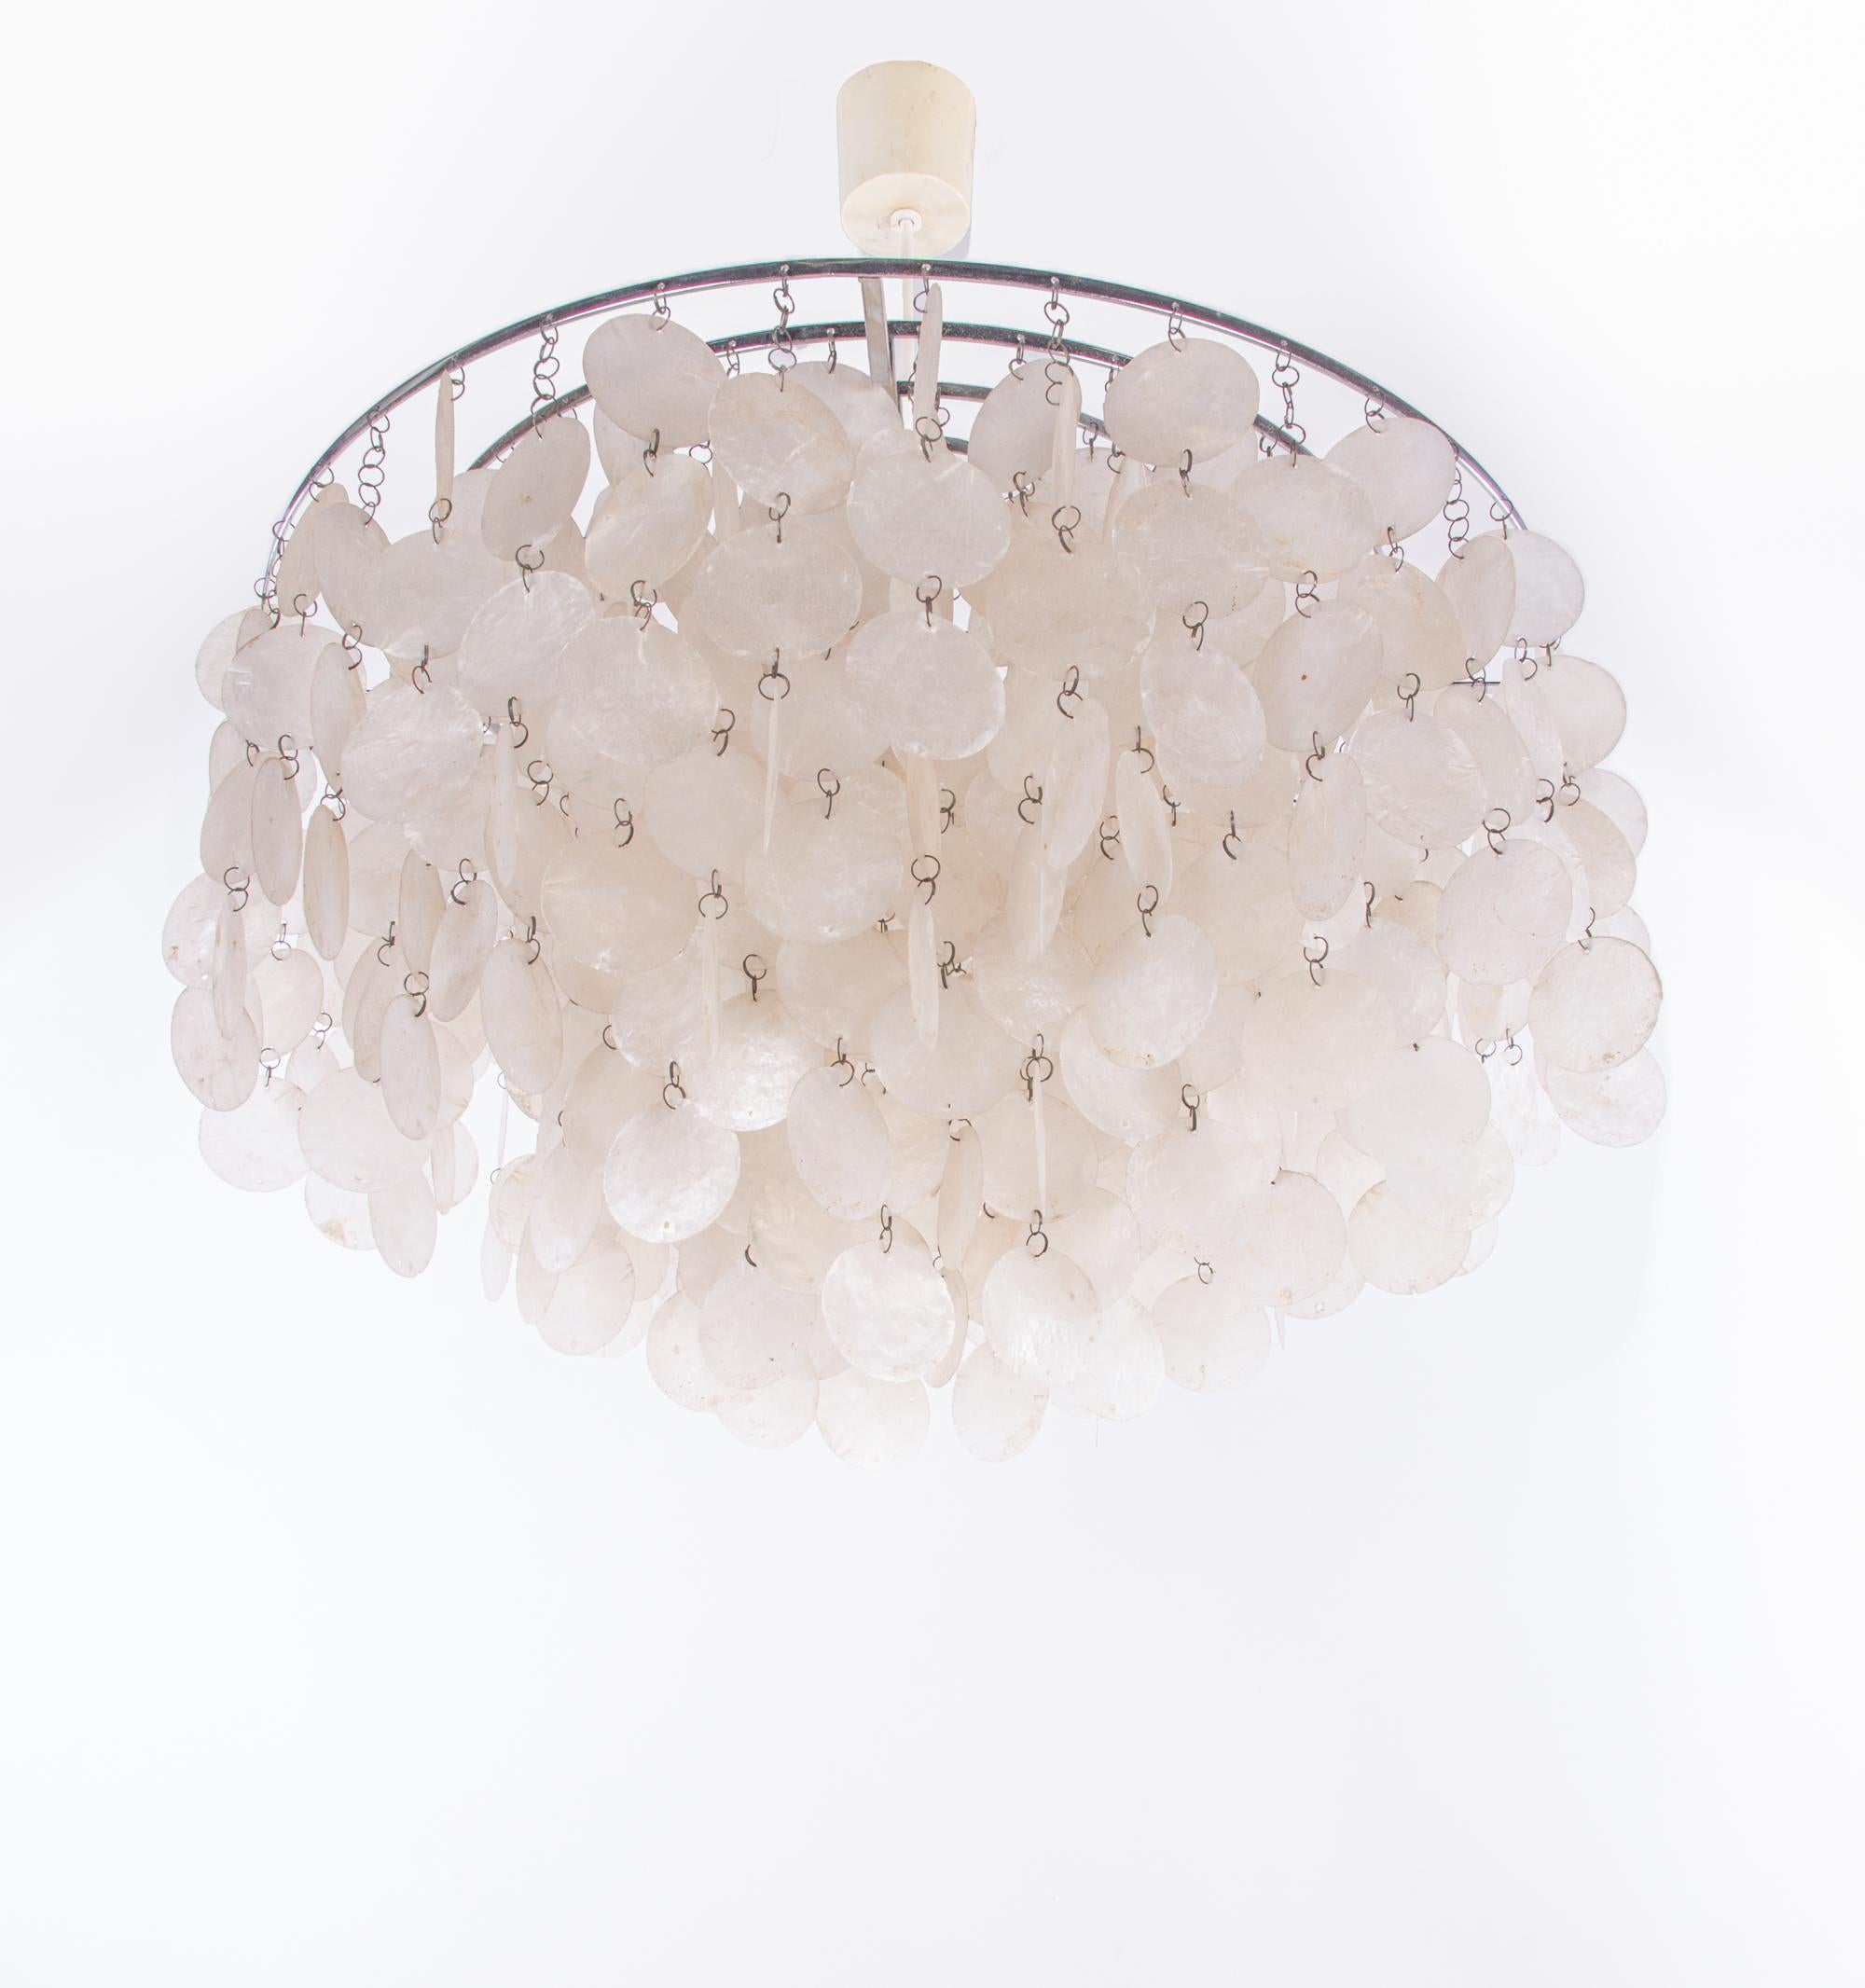 '1 of 3' Fun Shell Chandelier by Verner Panton for J. Luber Ag, Switzerland 1964 For Sale 3